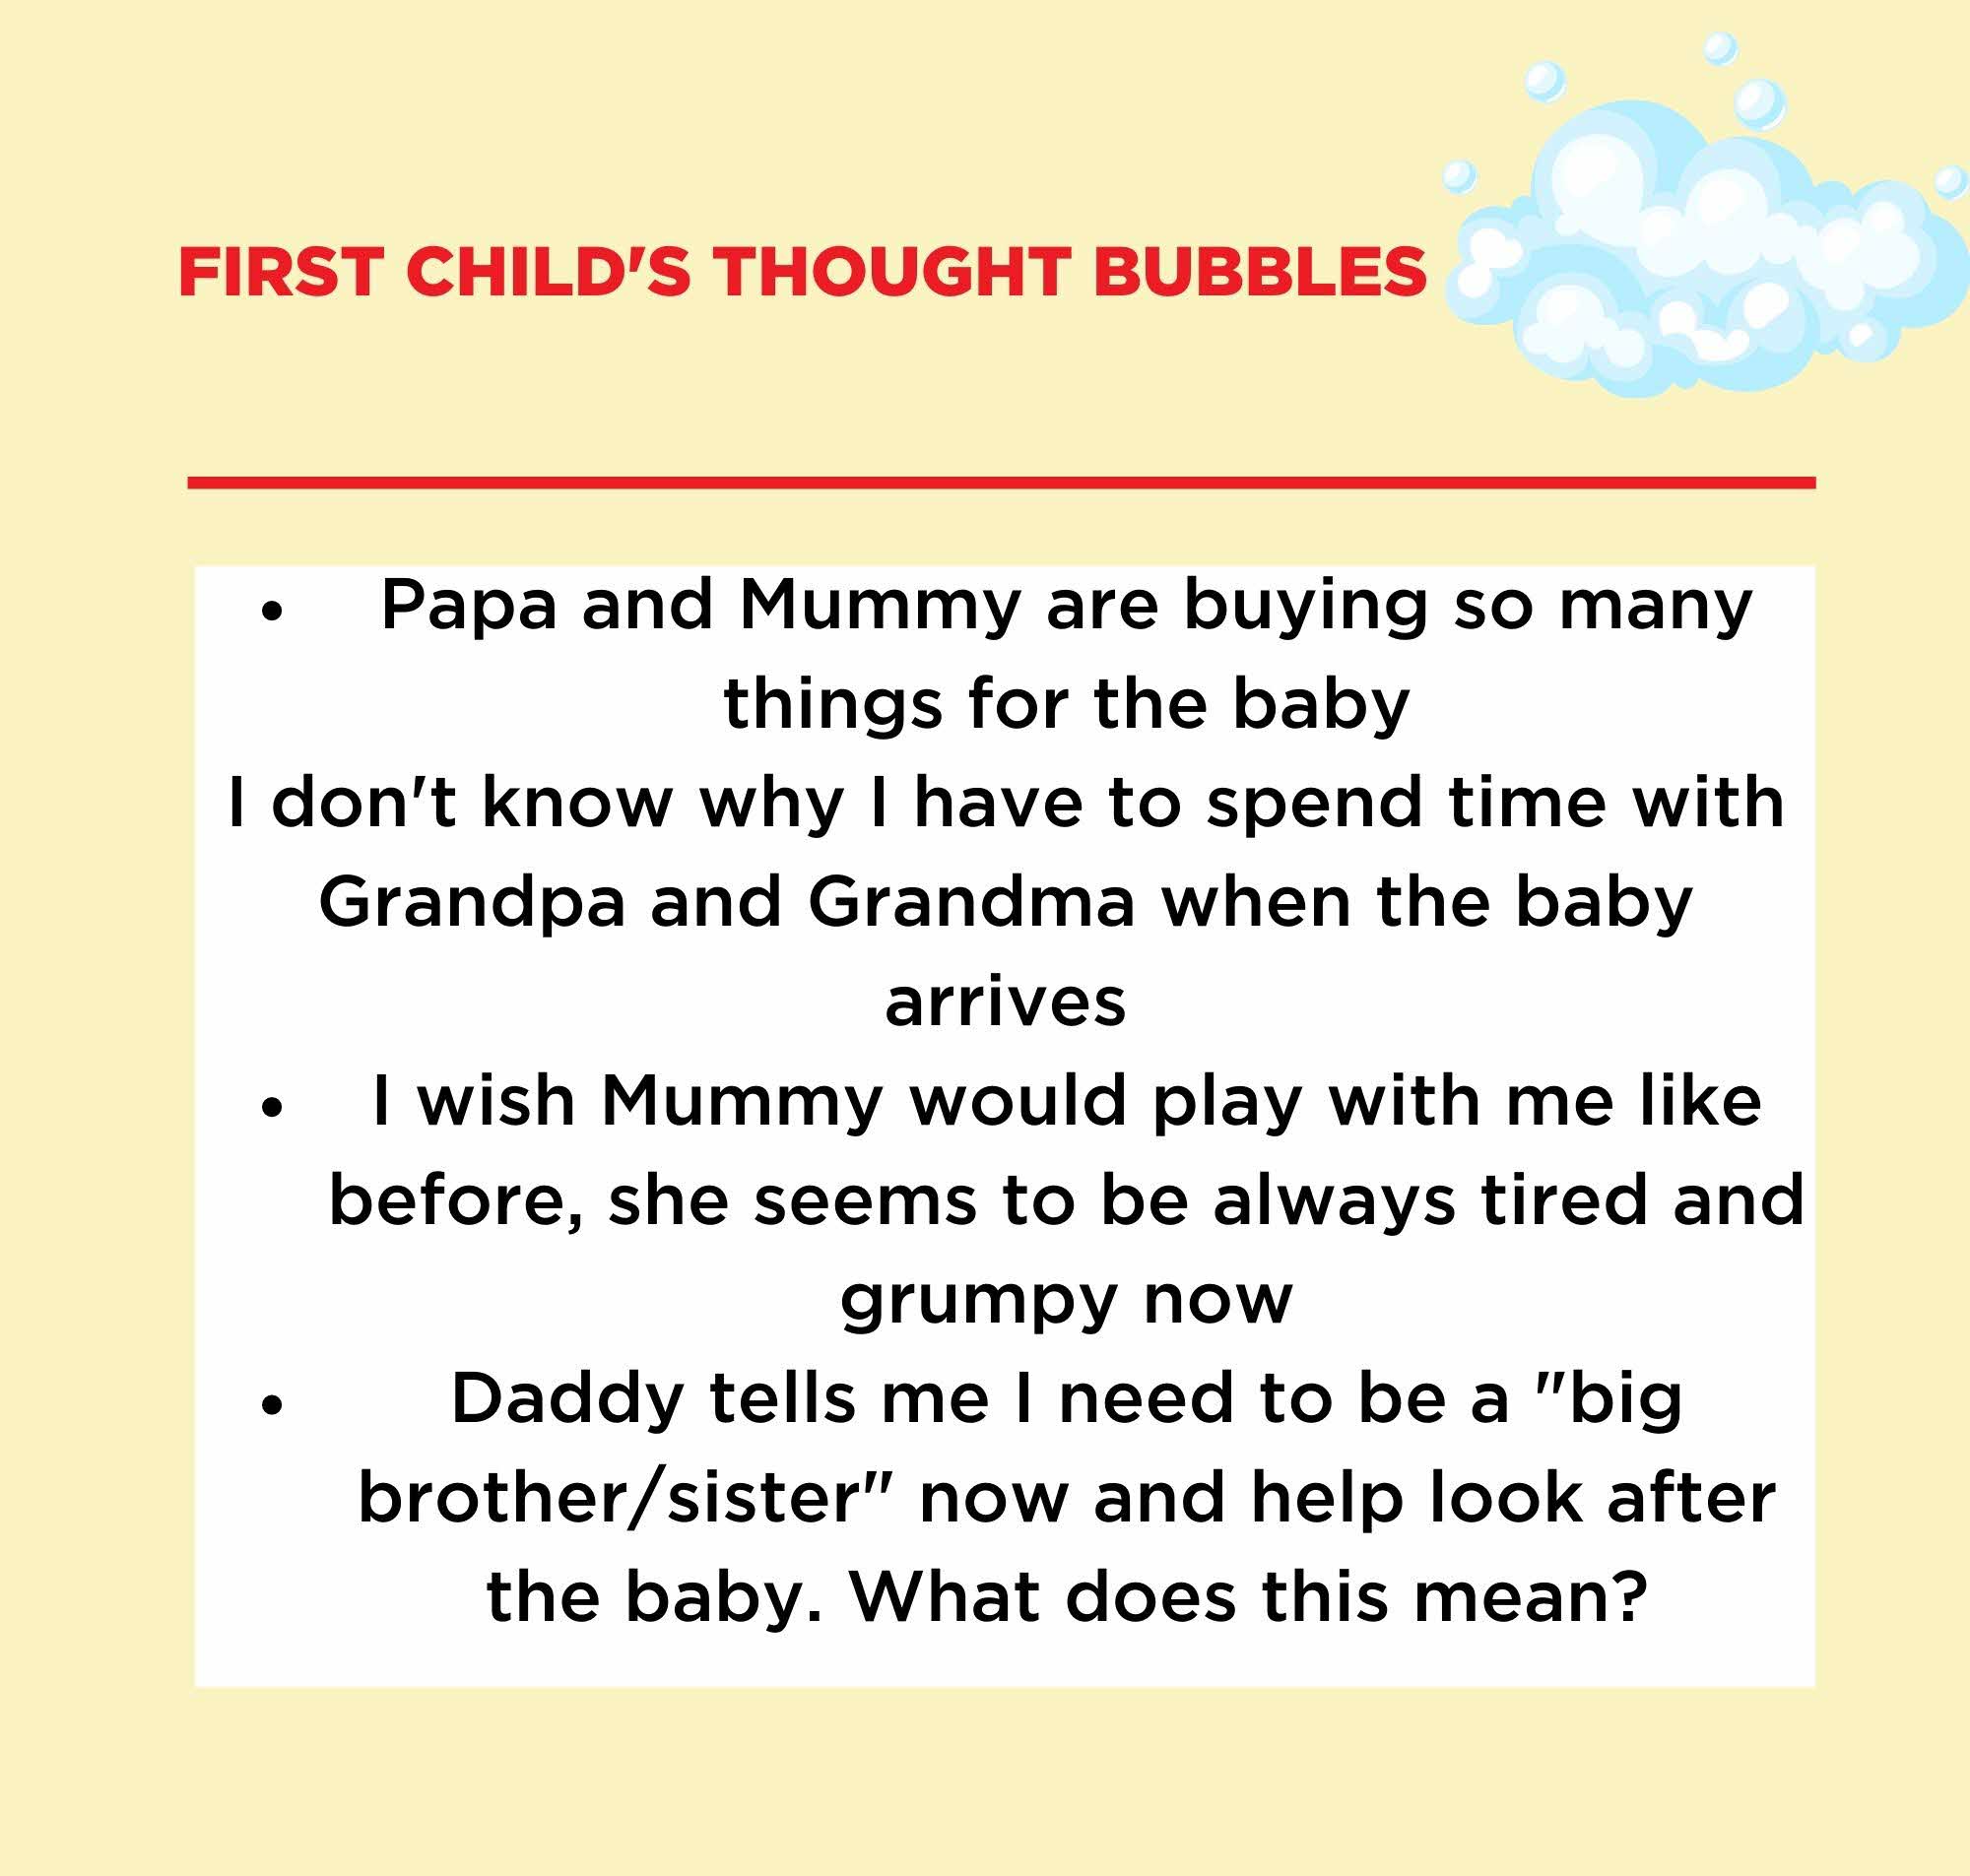 First Child's Thought Bubbles